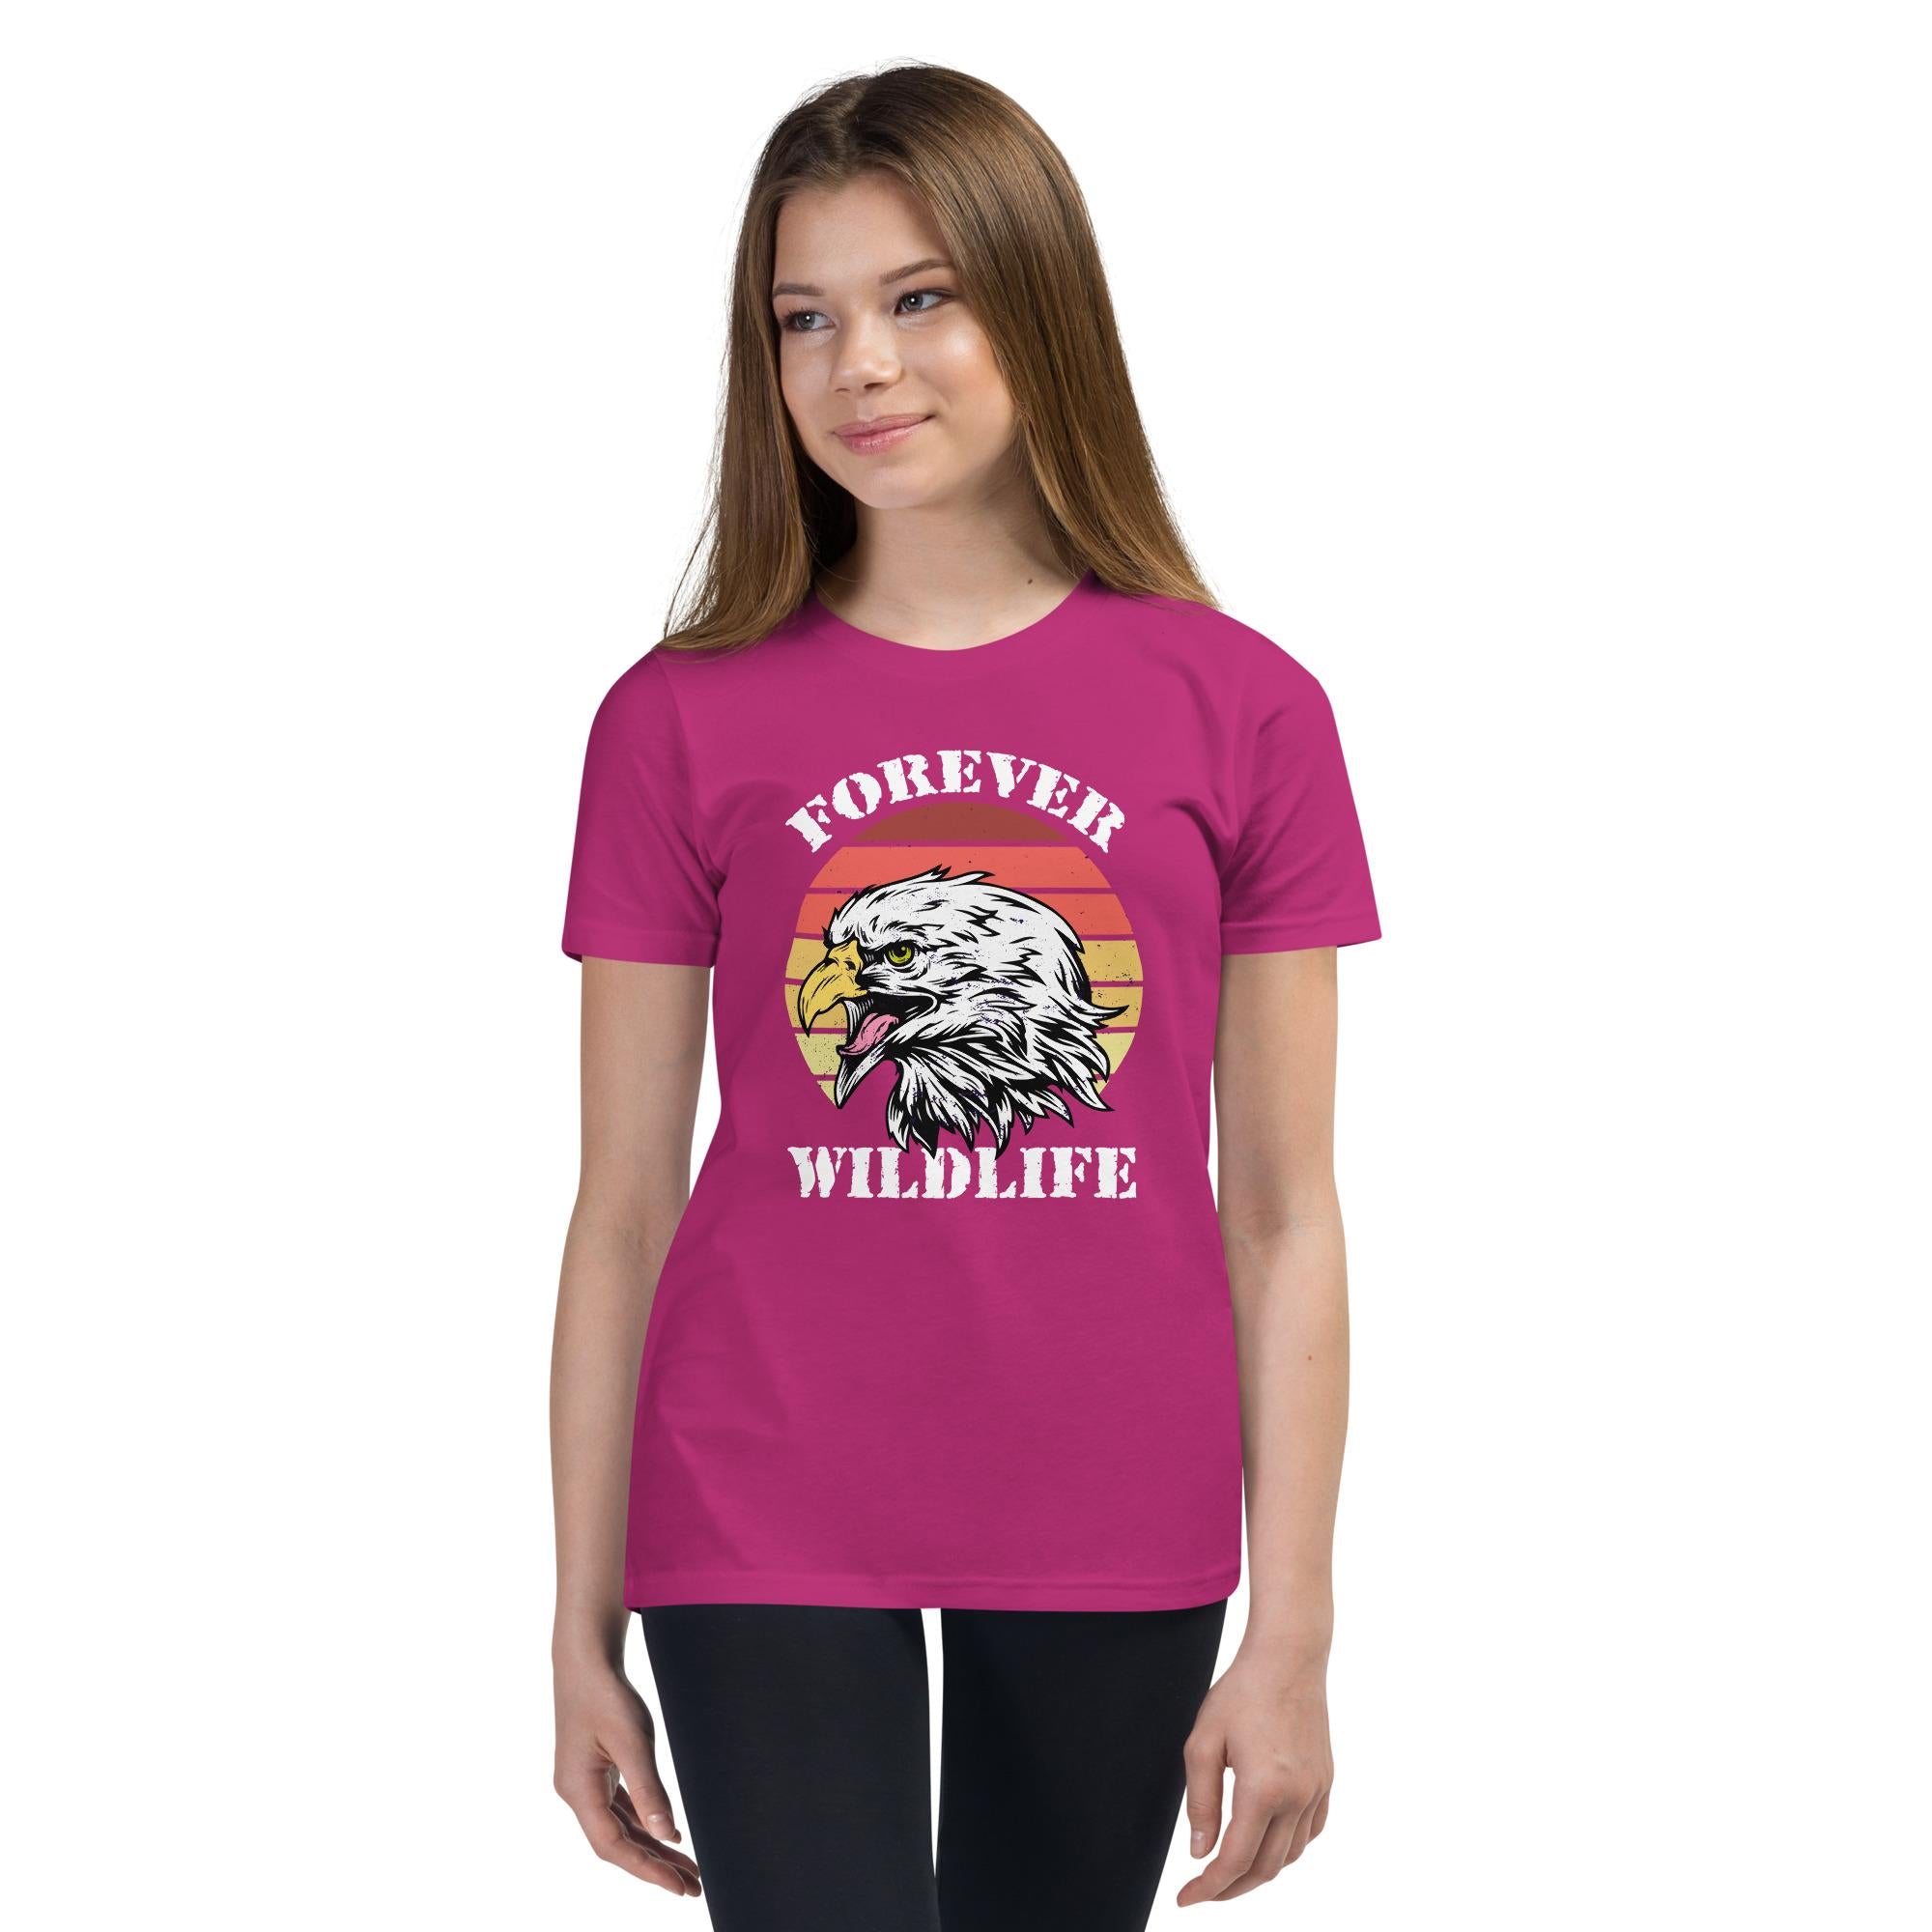 Teen wearing Berry Youth T-Shirt with Eagle graphic as part of Wildlife T Shirts, Wildlife Clothing & Apparel by Forever Wildlife